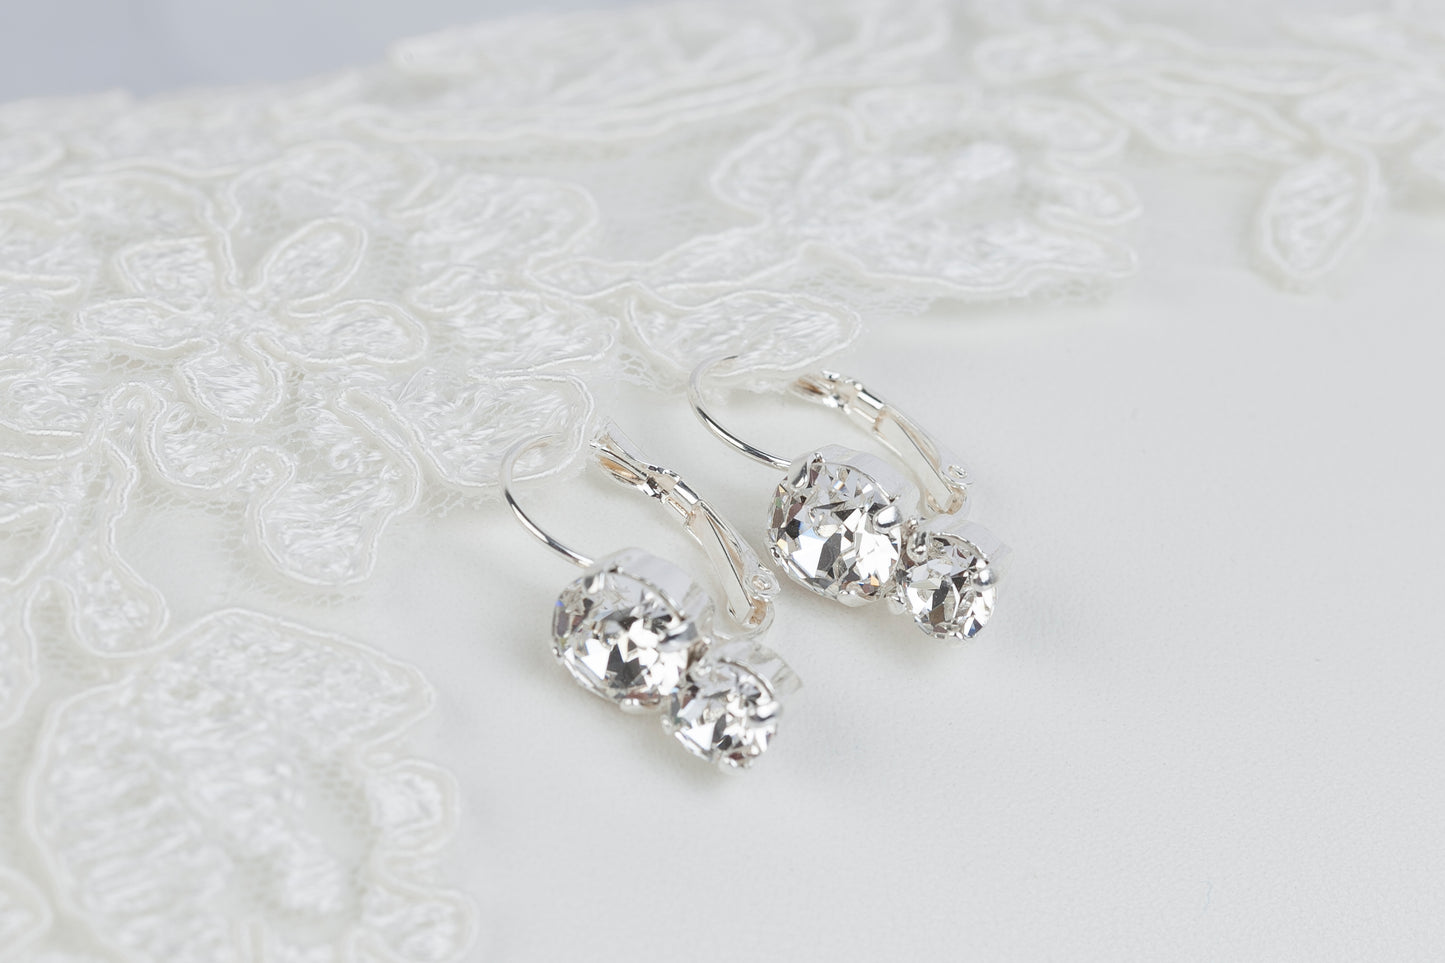 Ava - A simple sparkling leverback earring for brides or bridesmaids.